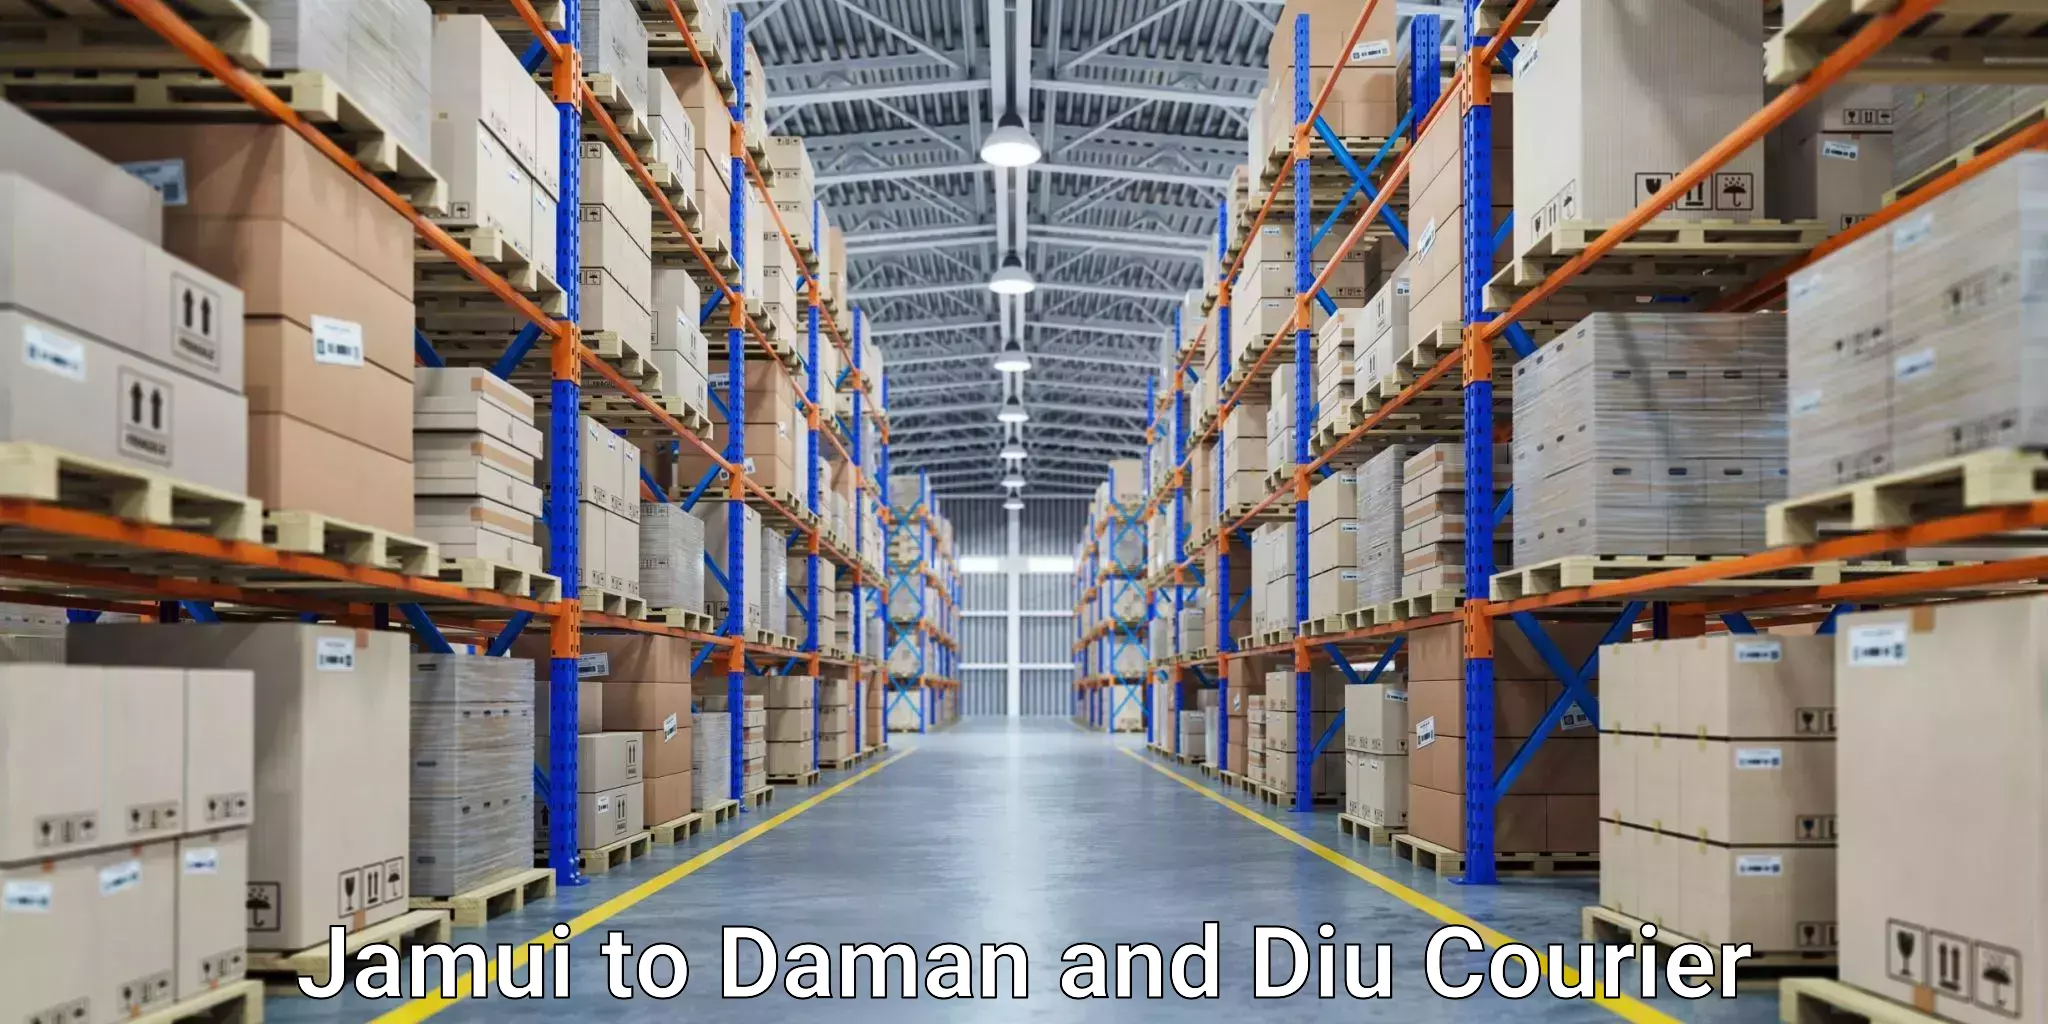 Customizable delivery plans Jamui to Daman and Diu